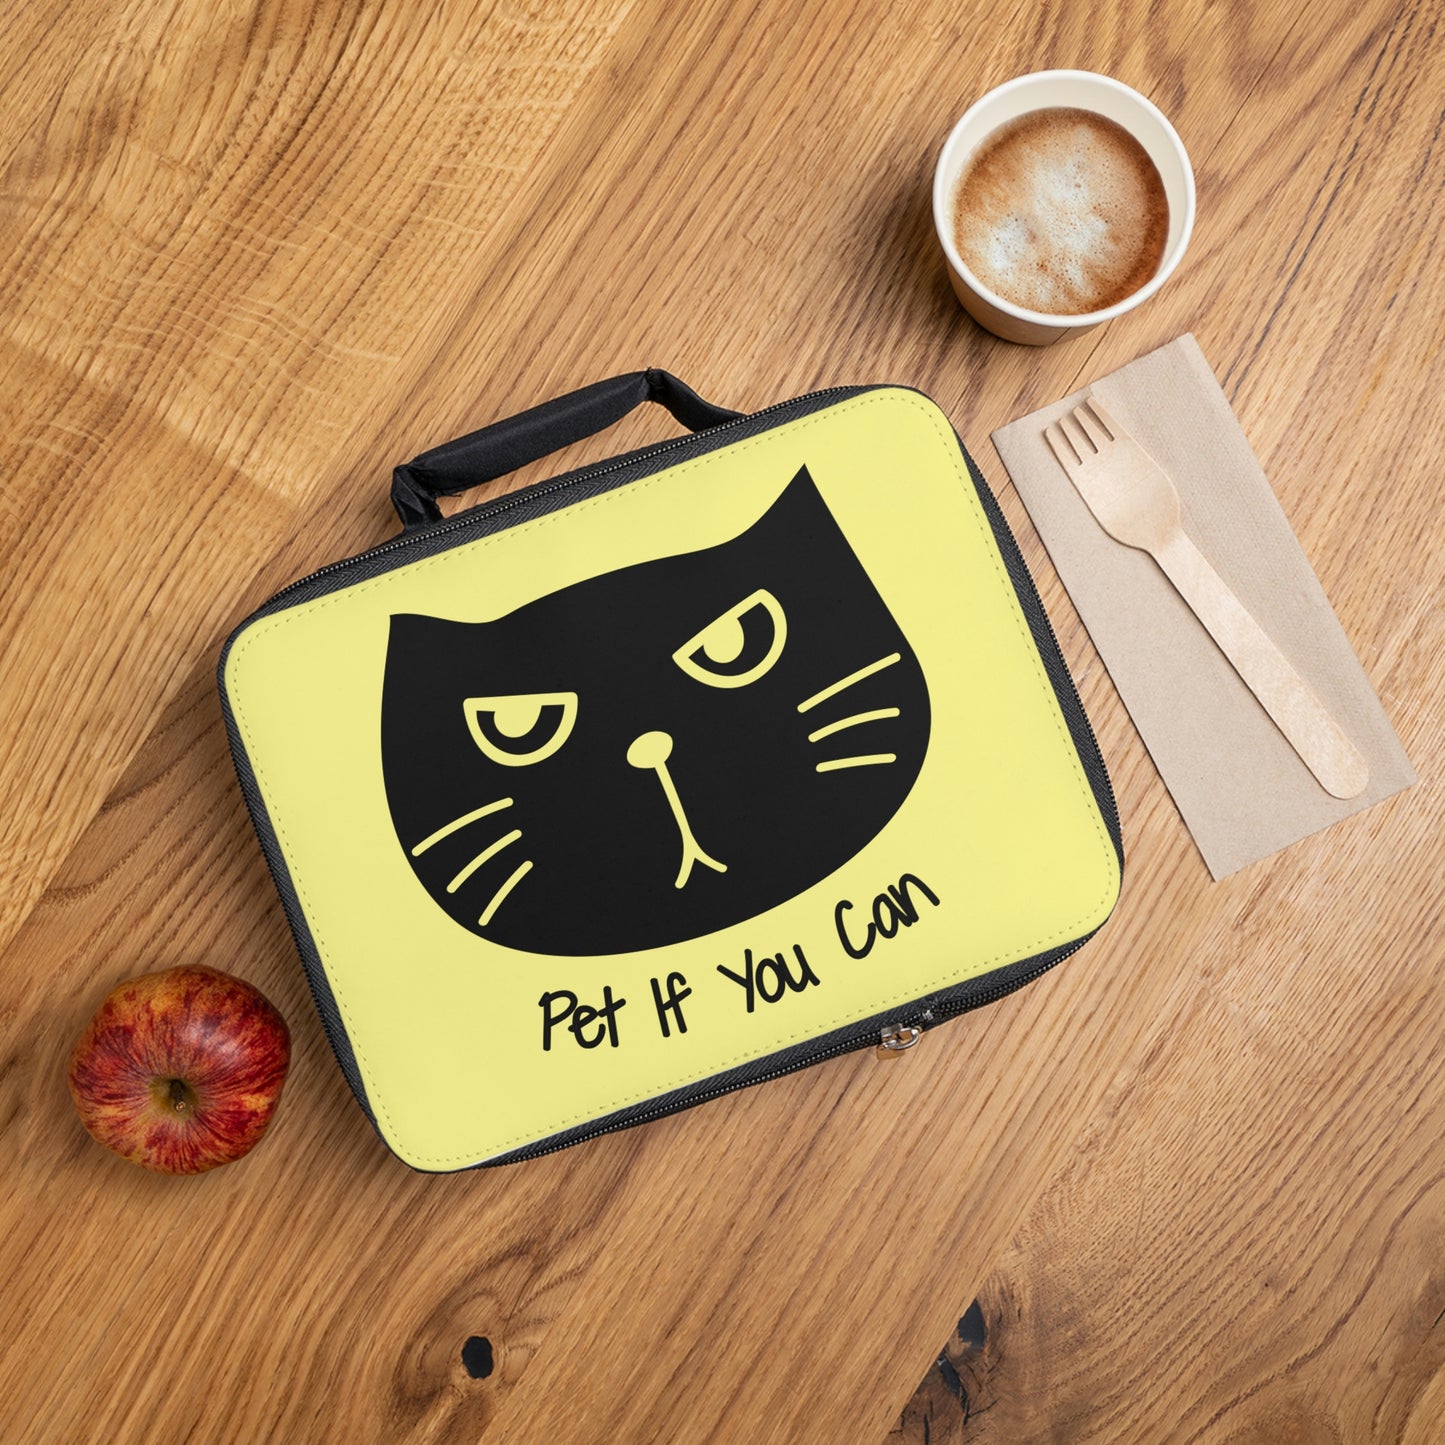 Funny cat lunch bag, Black cat says pet if you can Lunch tote, cute yellow Lunch Bag, kawaii picnic bag, back to school gift for cat lovers